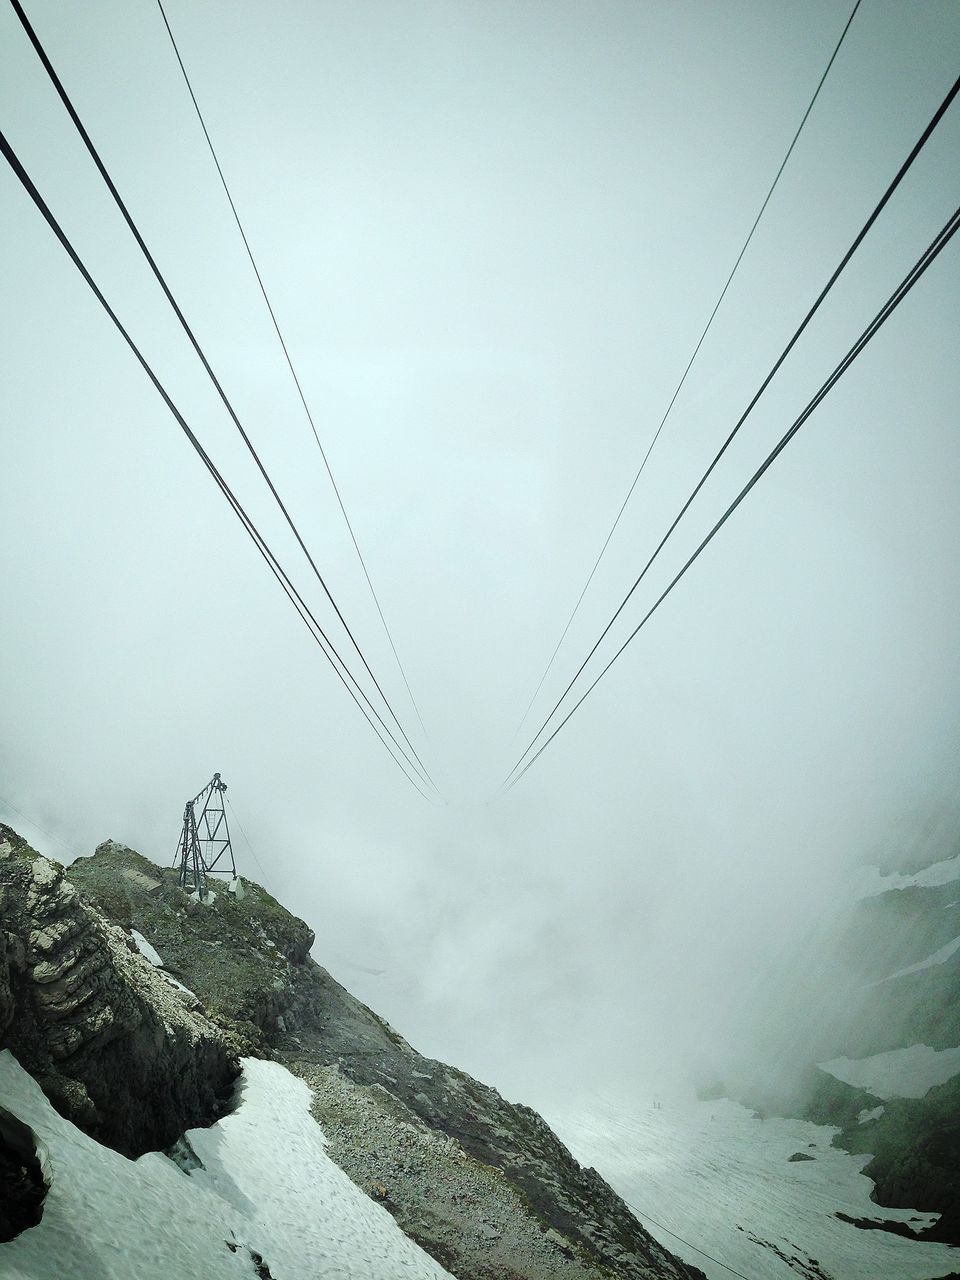 mountain, power line, cable, snow, connection, electricity pylon, overhead cable car, winter, scenics, tranquility, tranquil scene, low angle view, sky, electricity, cold temperature, beauty in nature, nature, mountain range, weather, power supply